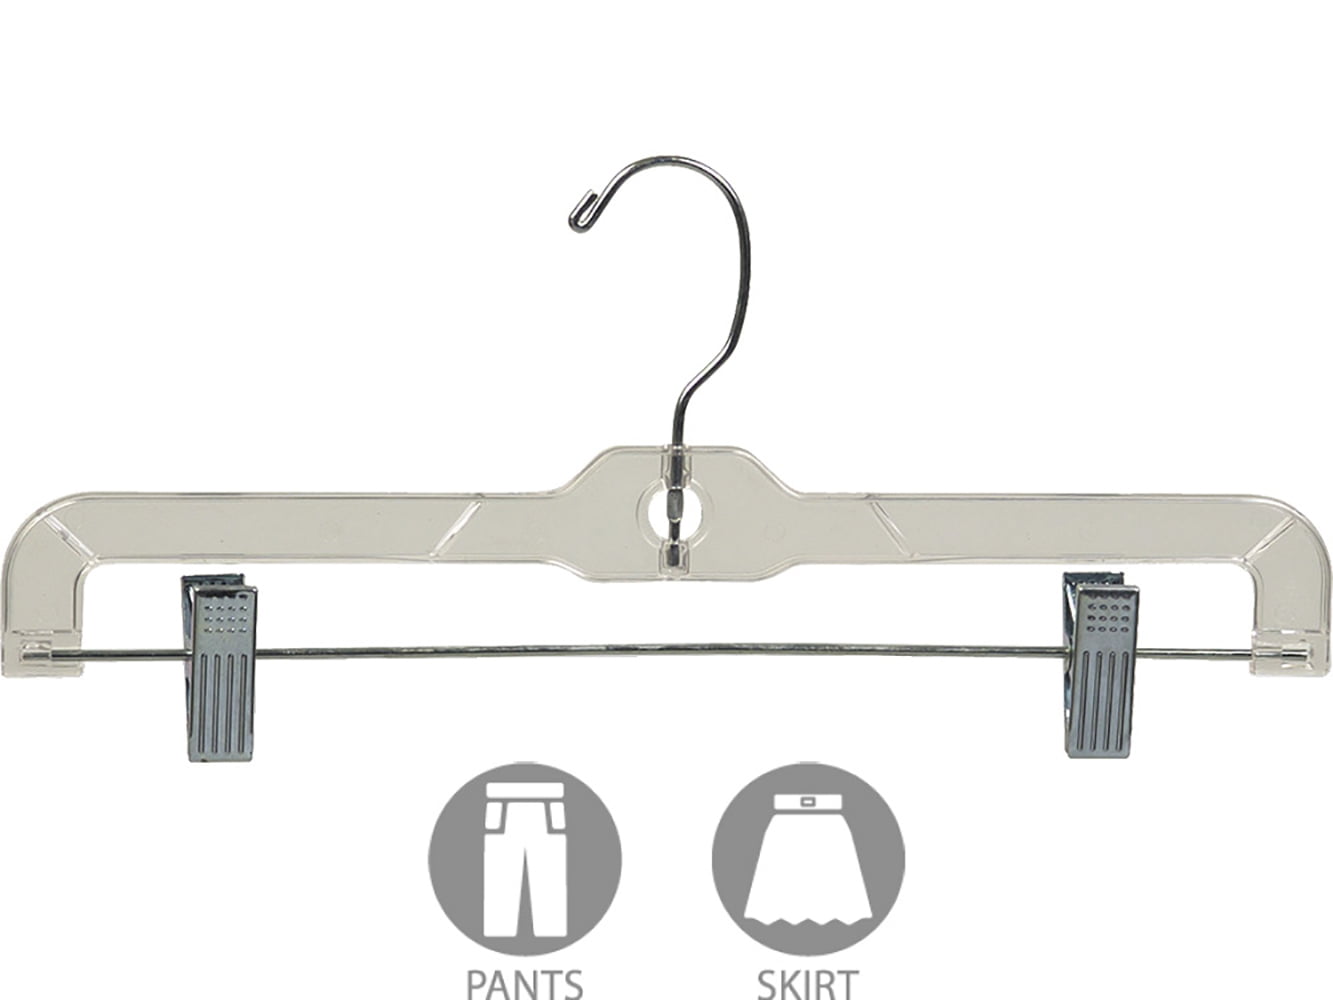 Heavyweight Clear Coat Hanger (Long Hook)  Product & Reviews - Only Hangers  – Only Hangers Inc.